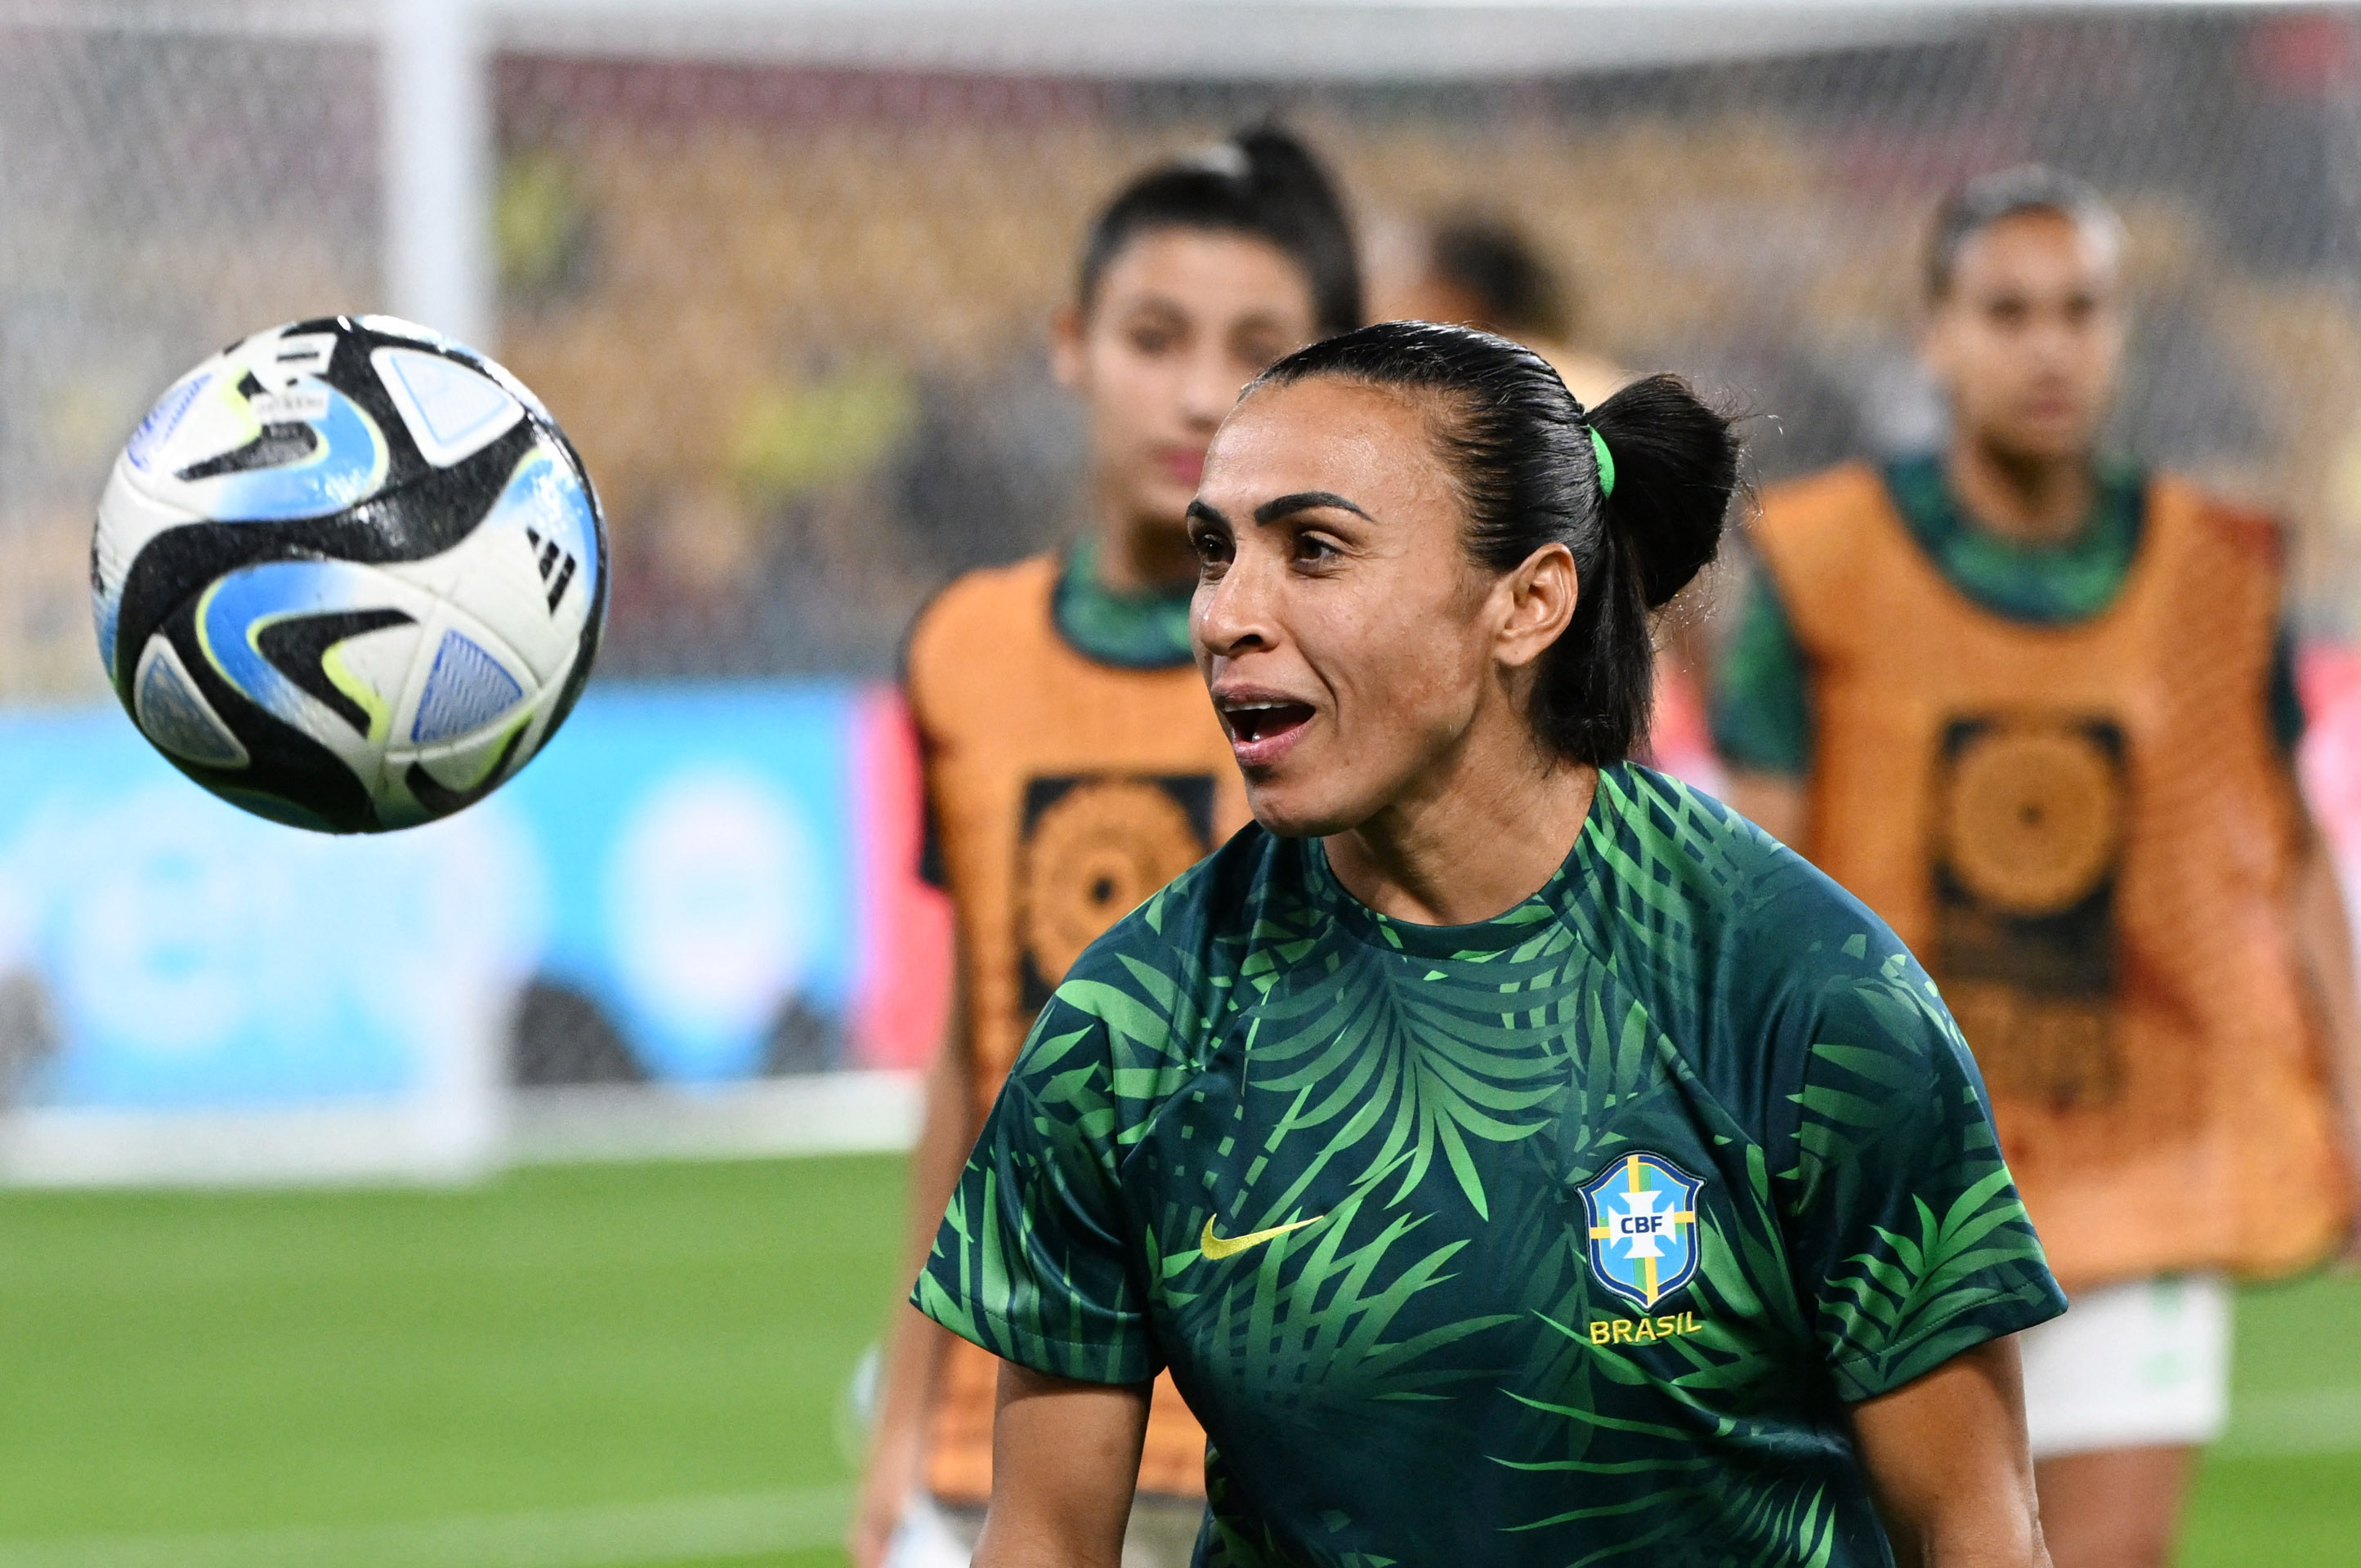 Campaign in Brazil Uses AI To Highlight Women's World Cup Teams